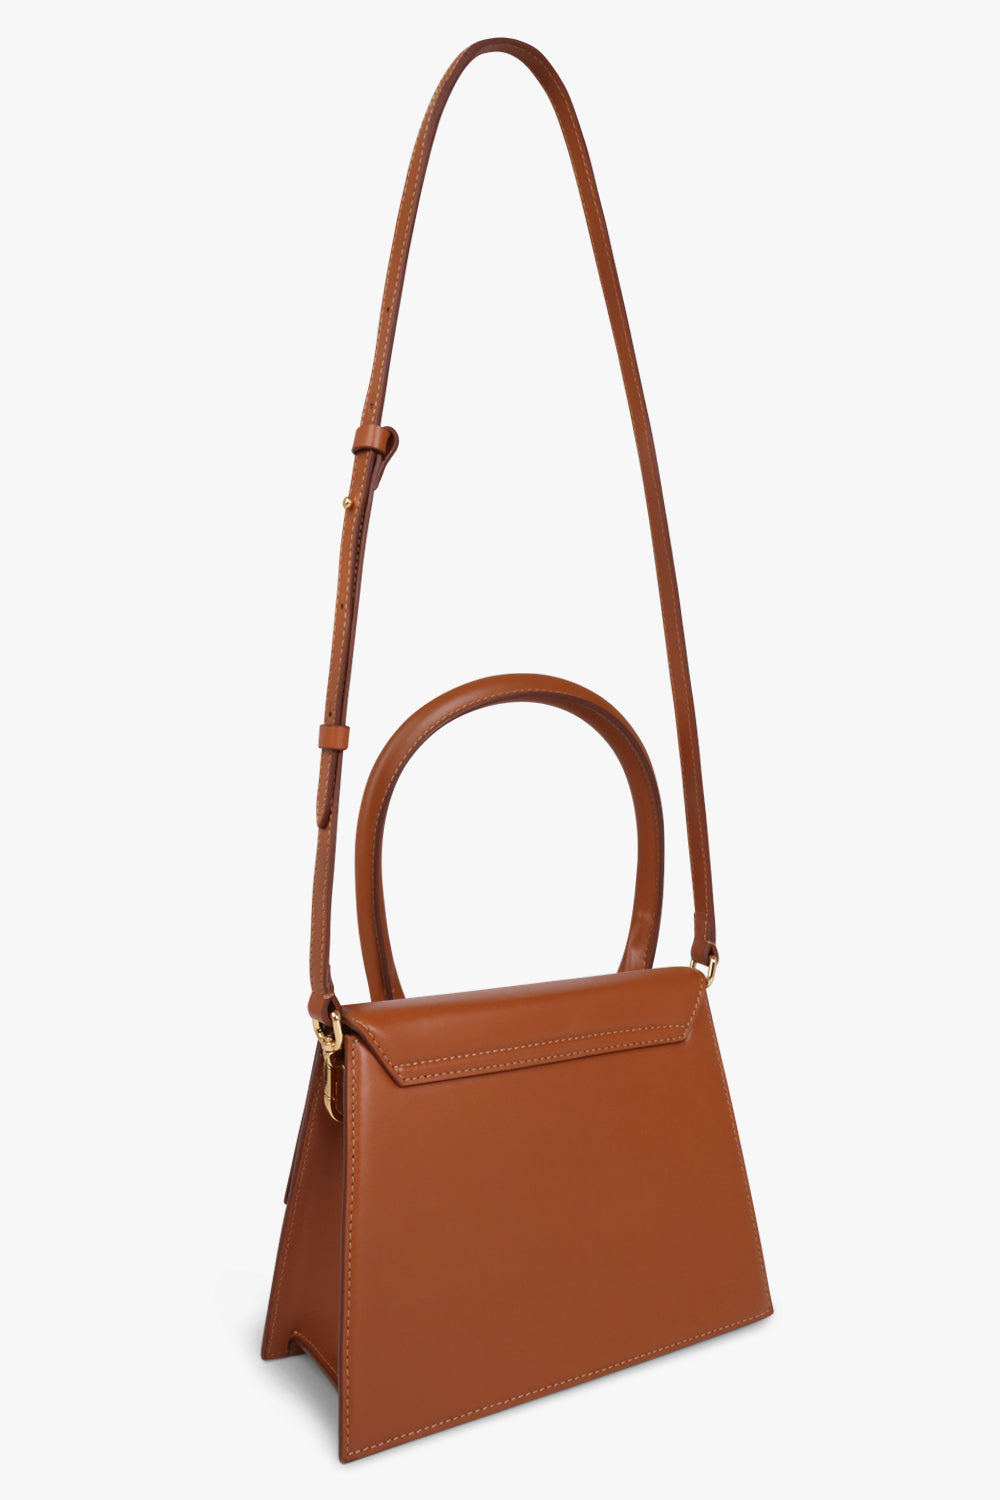 JACQUEMUS BAGS BROWN / Light Brown 2 / ONE SIZE Le Grand Chiquito Bag | Light Brown with Contrast Stitching